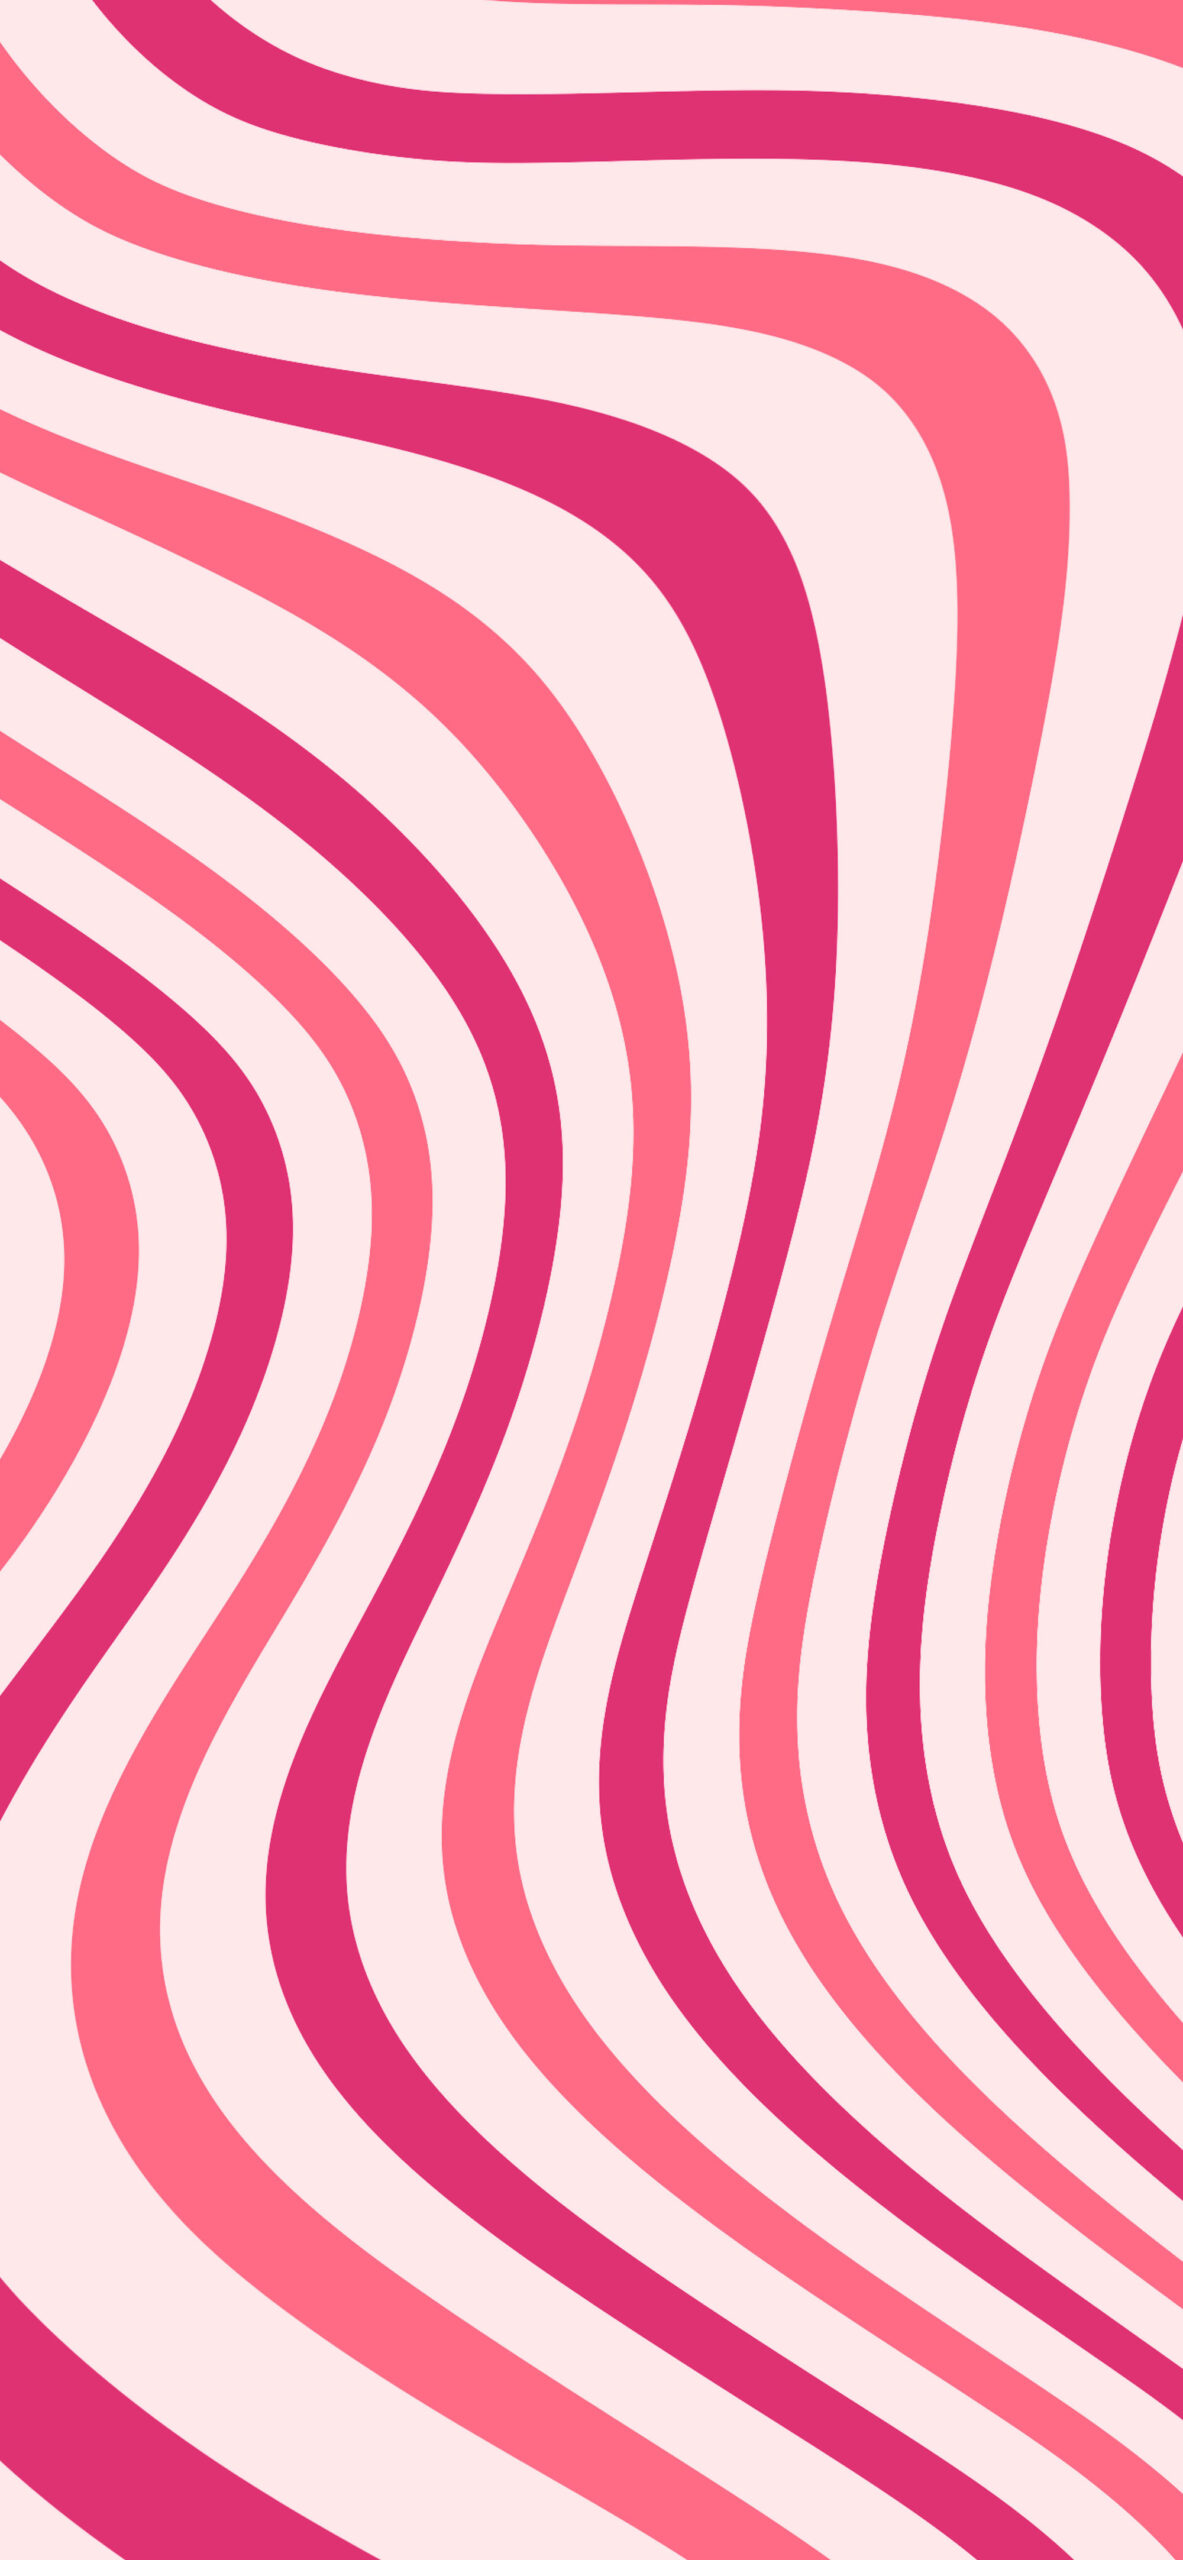 A pink and red wavy lines background. - Trippy